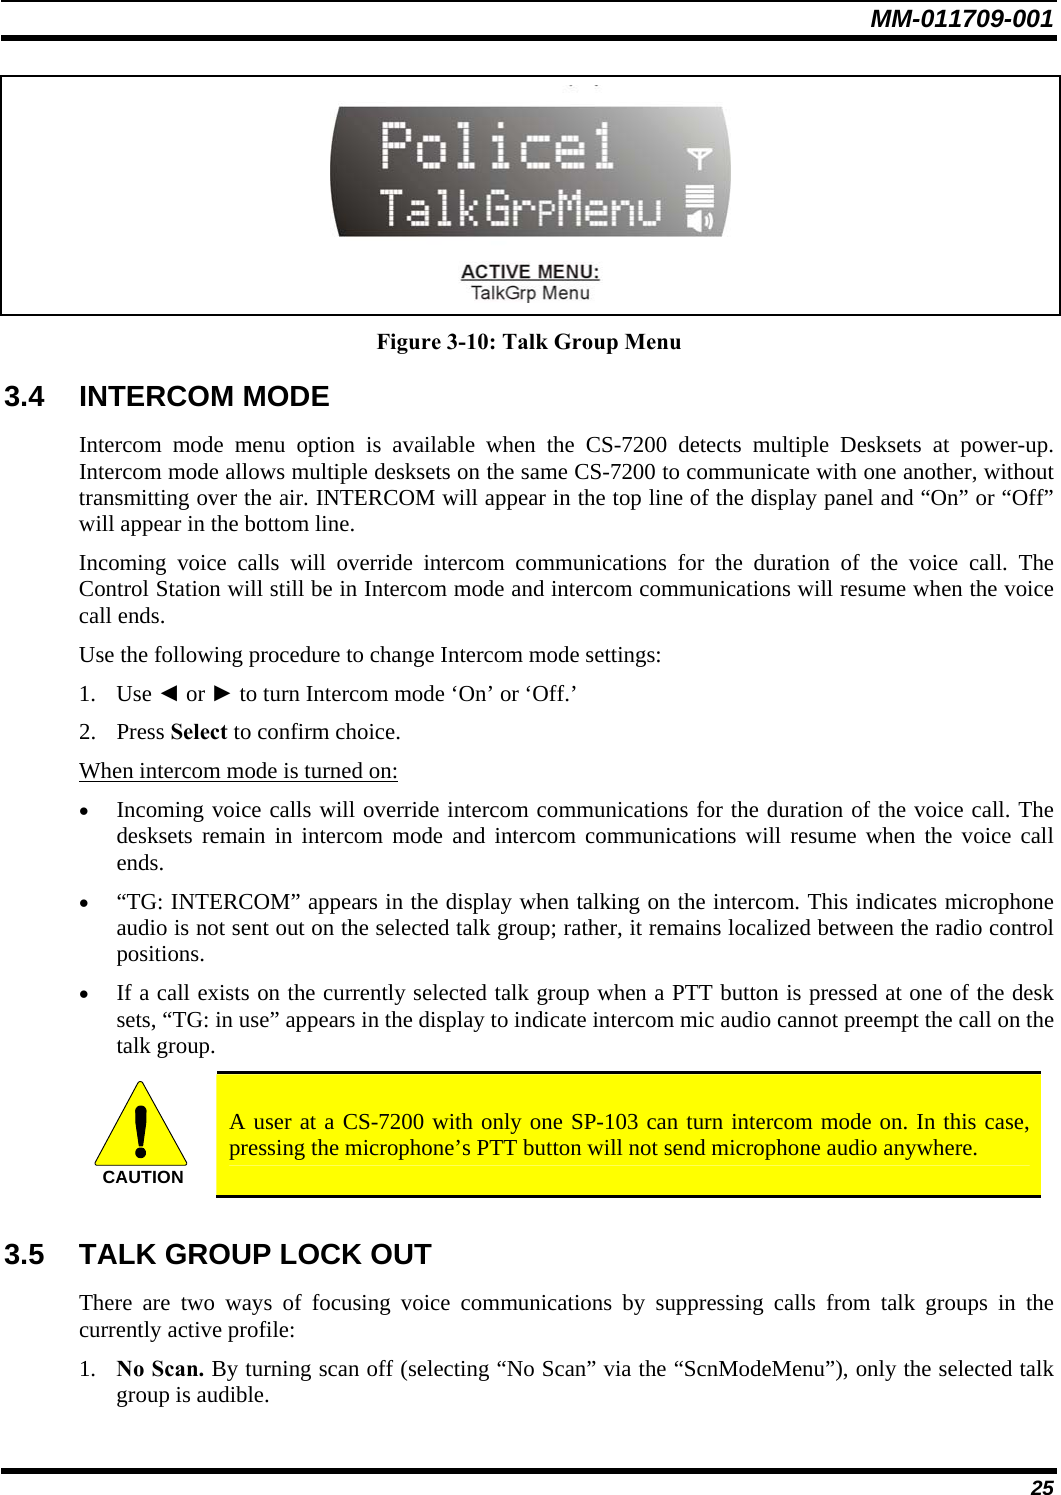 MM-011709-001 25  Figure 3-10: Talk Group Menu 3.4 INTERCOM MODE Intercom mode menu option is available when the CS-7200 detects multiple Desksets at power-up. Intercom mode allows multiple desksets on the same CS-7200 to communicate with one another, without transmitting over the air. INTERCOM will appear in the top line of the display panel and “On” or “Off” will appear in the bottom line.  Incoming voice calls will override intercom communications for the duration of the voice call. The Control Station will still be in Intercom mode and intercom communications will resume when the voice call ends. Use the following procedure to change Intercom mode settings: 1. Use ◄ or ► to turn Intercom mode ‘On’ or ‘Off.’ 2. Press Select to confirm choice. When intercom mode is turned on: • Incoming voice calls will override intercom communications for the duration of the voice call. The desksets remain in intercom mode and intercom communications will resume when the voice call ends. • “TG: INTERCOM” appears in the display when talking on the intercom. This indicates microphone audio is not sent out on the selected talk group; rather, it remains localized between the radio control positions. • If a call exists on the currently selected talk group when a PTT button is pressed at one of the desk sets, “TG: in use” appears in the display to indicate intercom mic audio cannot preempt the call on the talk group. CAUTION  A user at a CS-7200 with only one SP-103 can turn intercom mode on. In this case, pressing the microphone’s PTT button will not send microphone audio anywhere.  3.5  TALK GROUP LOCK OUT There are two ways of focusing voice communications by suppressing calls from talk groups in the currently active profile: 1. No Scan. By turning scan off (selecting “No Scan” via the “ScnModeMenu”), only the selected talk group is audible. 